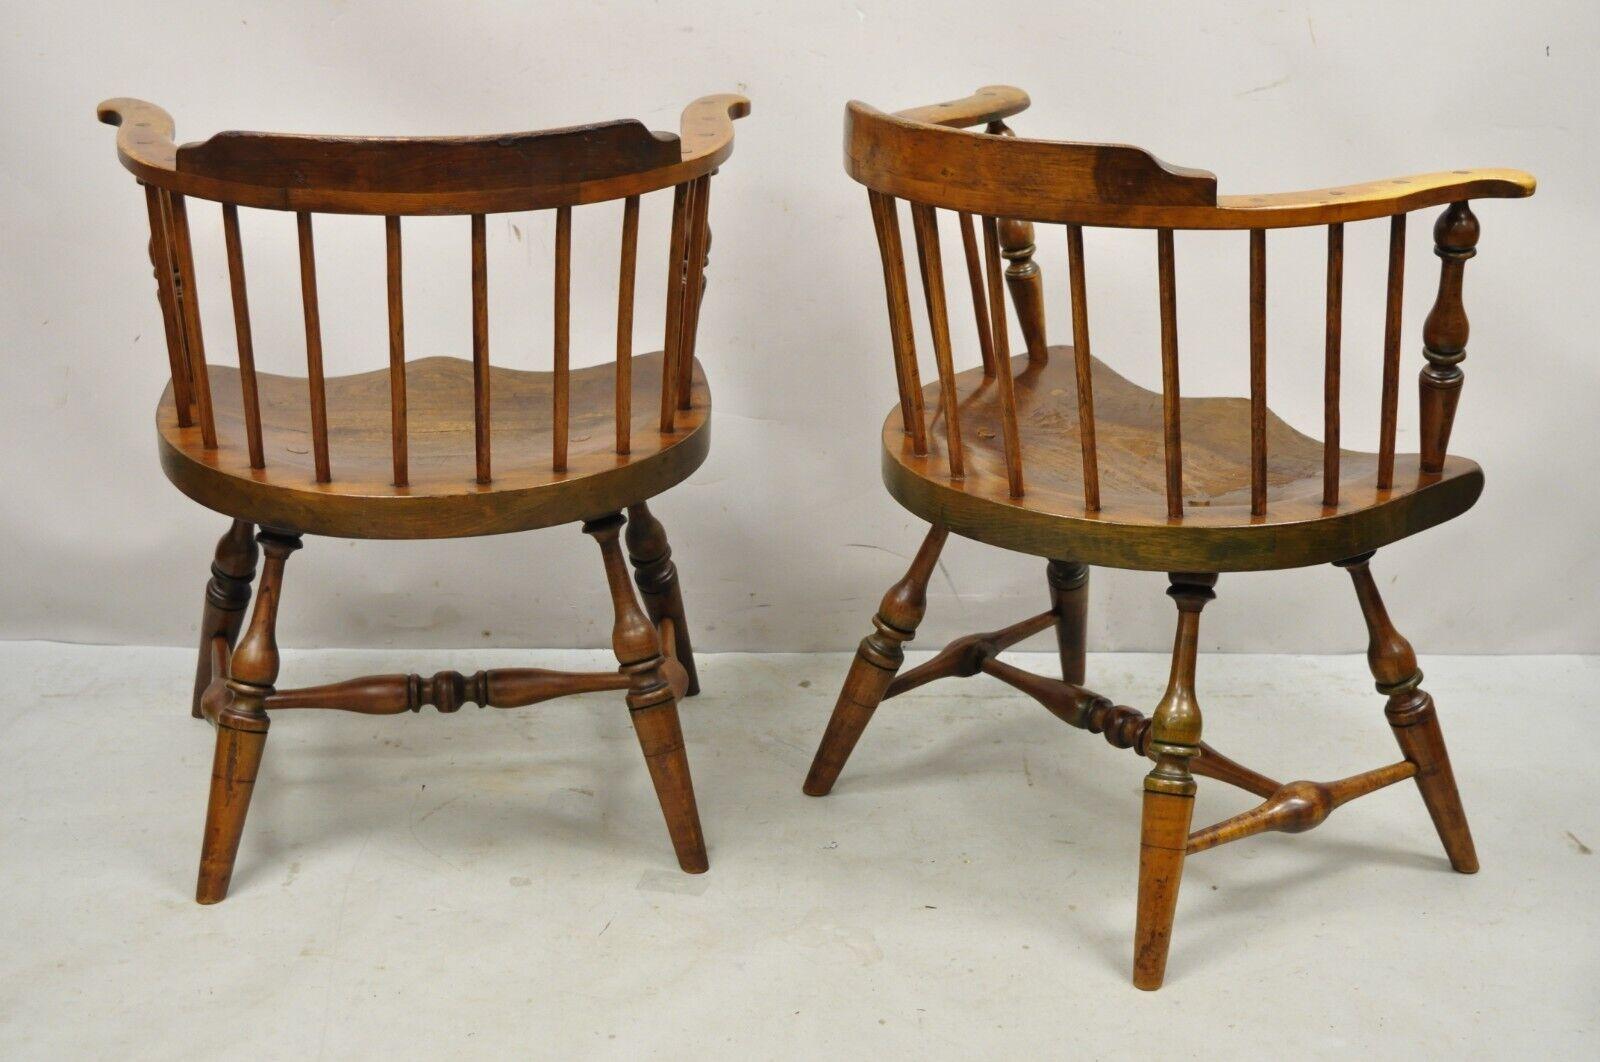 Antique Windsor Colonial Style Pine Wood Spindle Pub Arm Chairs, Pair For Sale 2